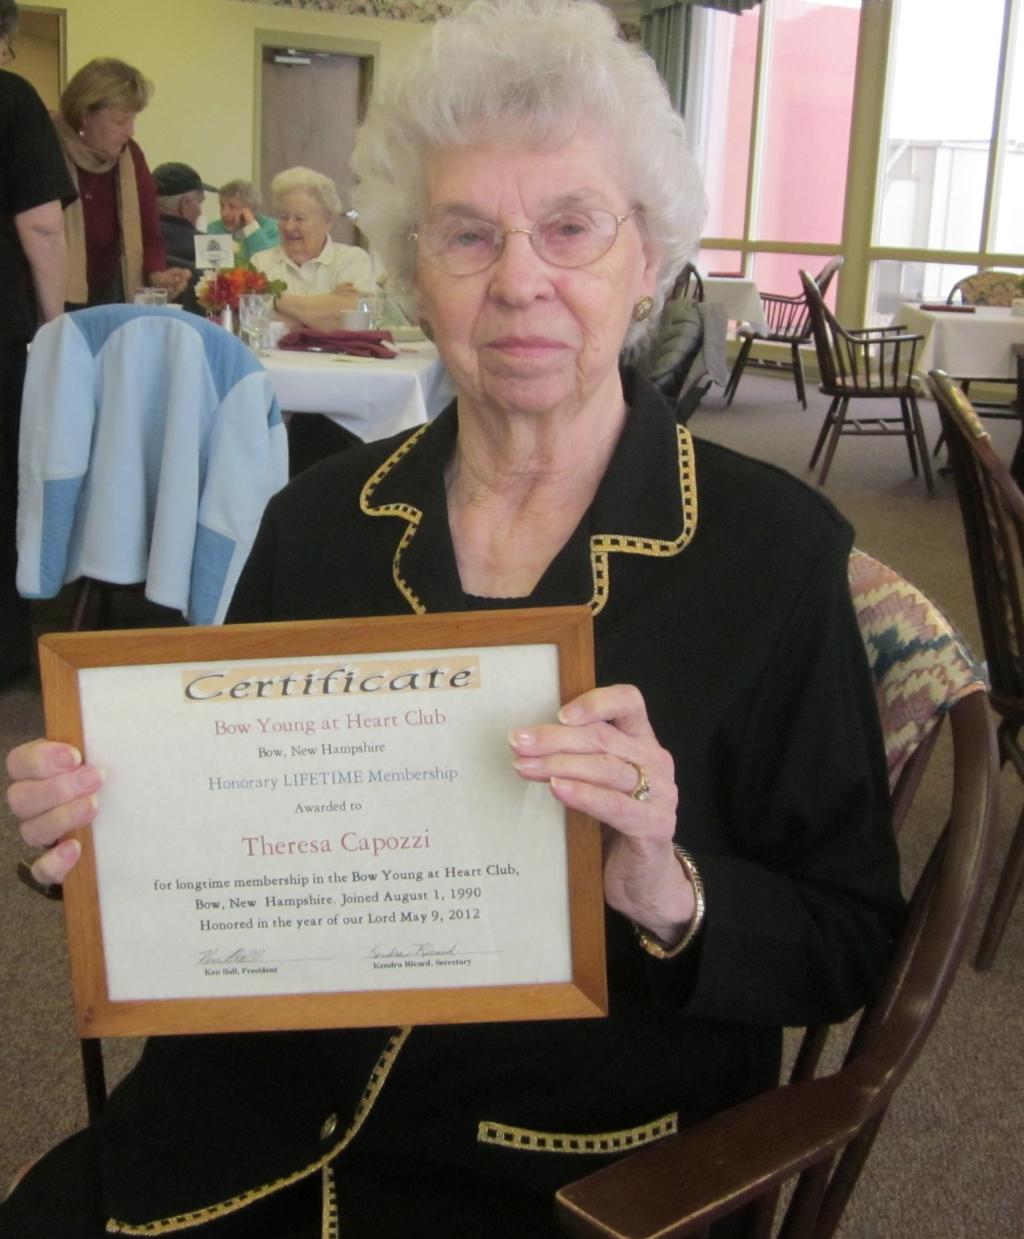 An honor for Theresa Capozzi During the Harvest Dinner on November 20, Retirement Resident Theresa Capozzi was presented with the Lifetime Membership Award